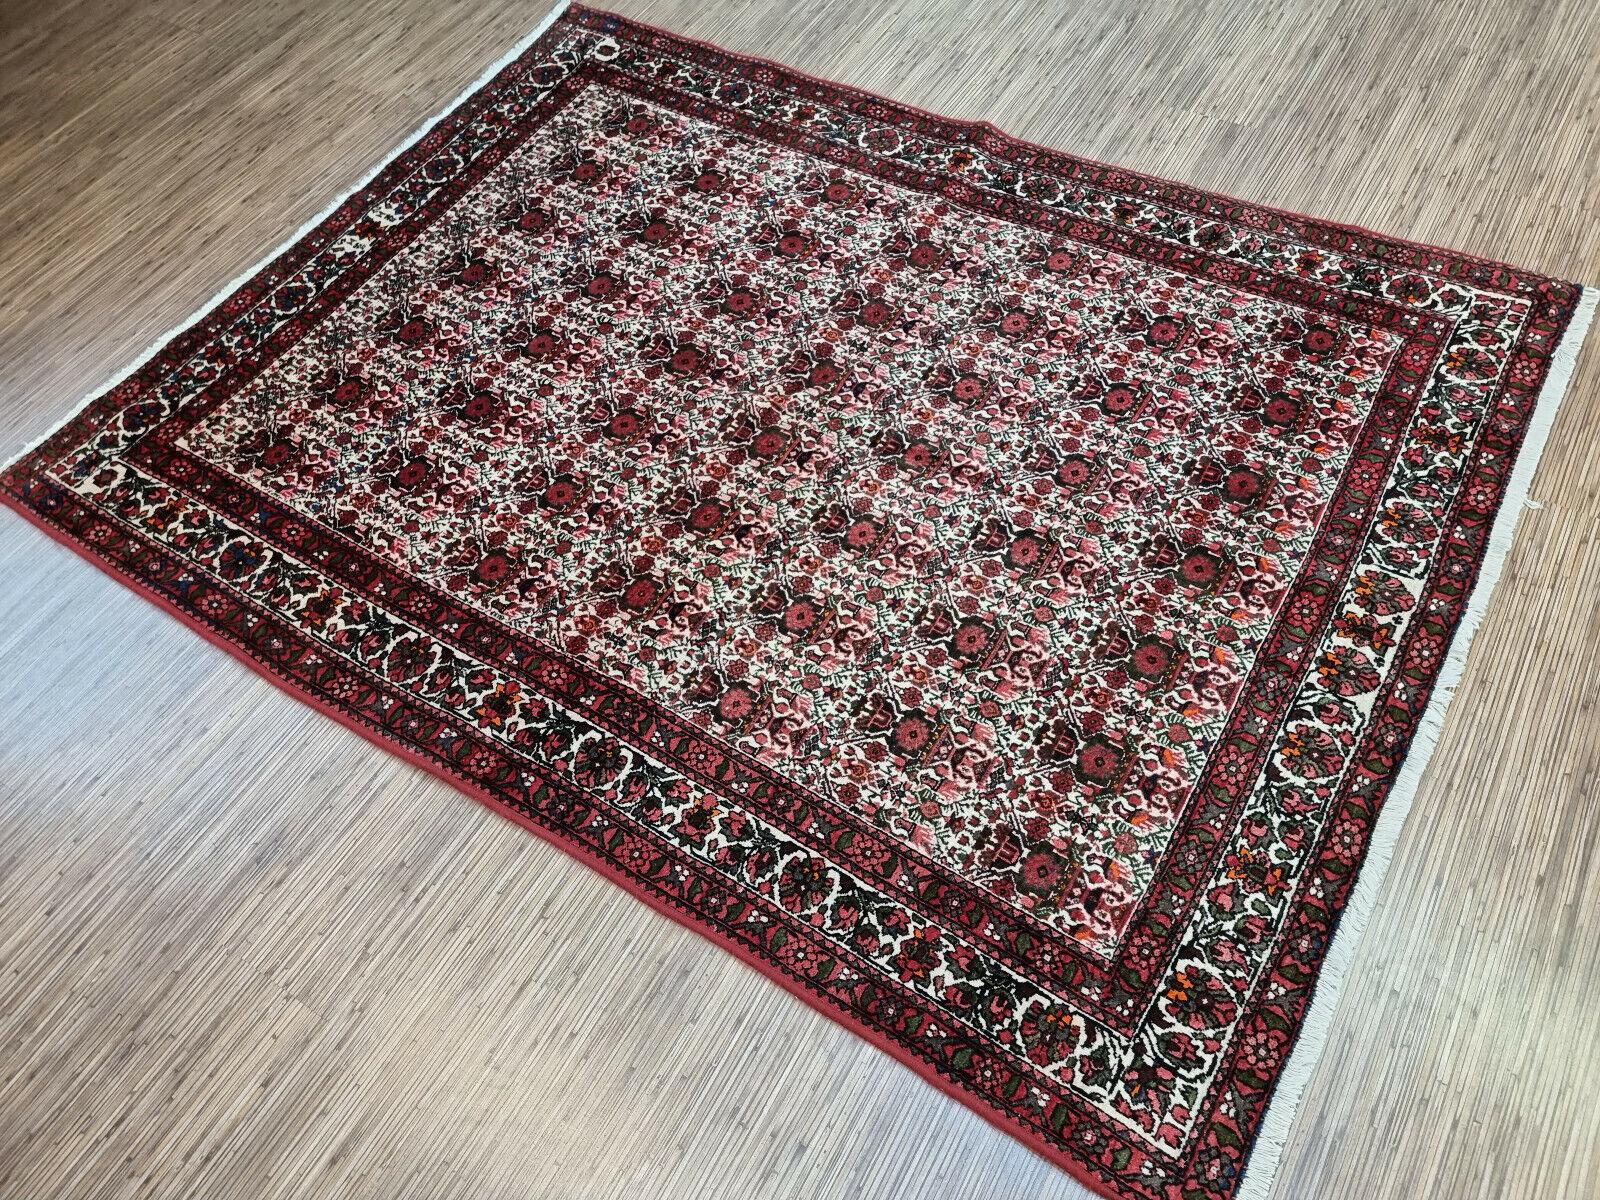 Add a touch of elegance and history to your home with our Handmade Vintage Persian Style Afshar Rug. This stunning piece was made in the 1950s, measuring 4.9’ x 6.5’ or 150cm x 200cm, ideal for medium-sized spaces.

The rug showcases a sophisticated